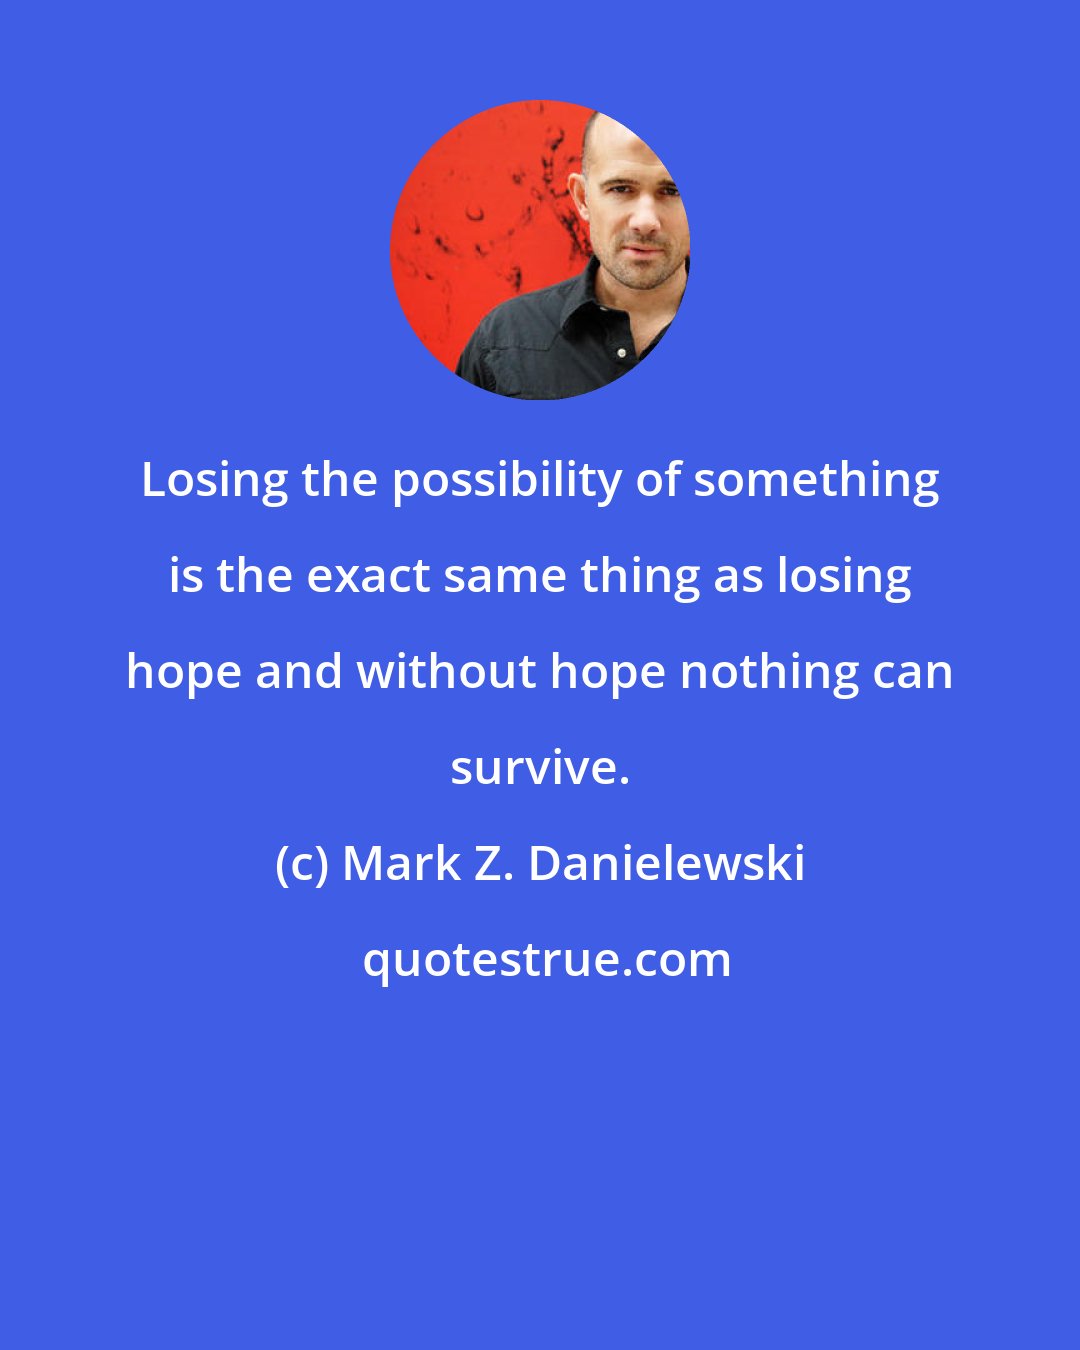 Mark Z. Danielewski: Losing the possibility of something is the exact same thing as losing hope and without hope nothing can survive.